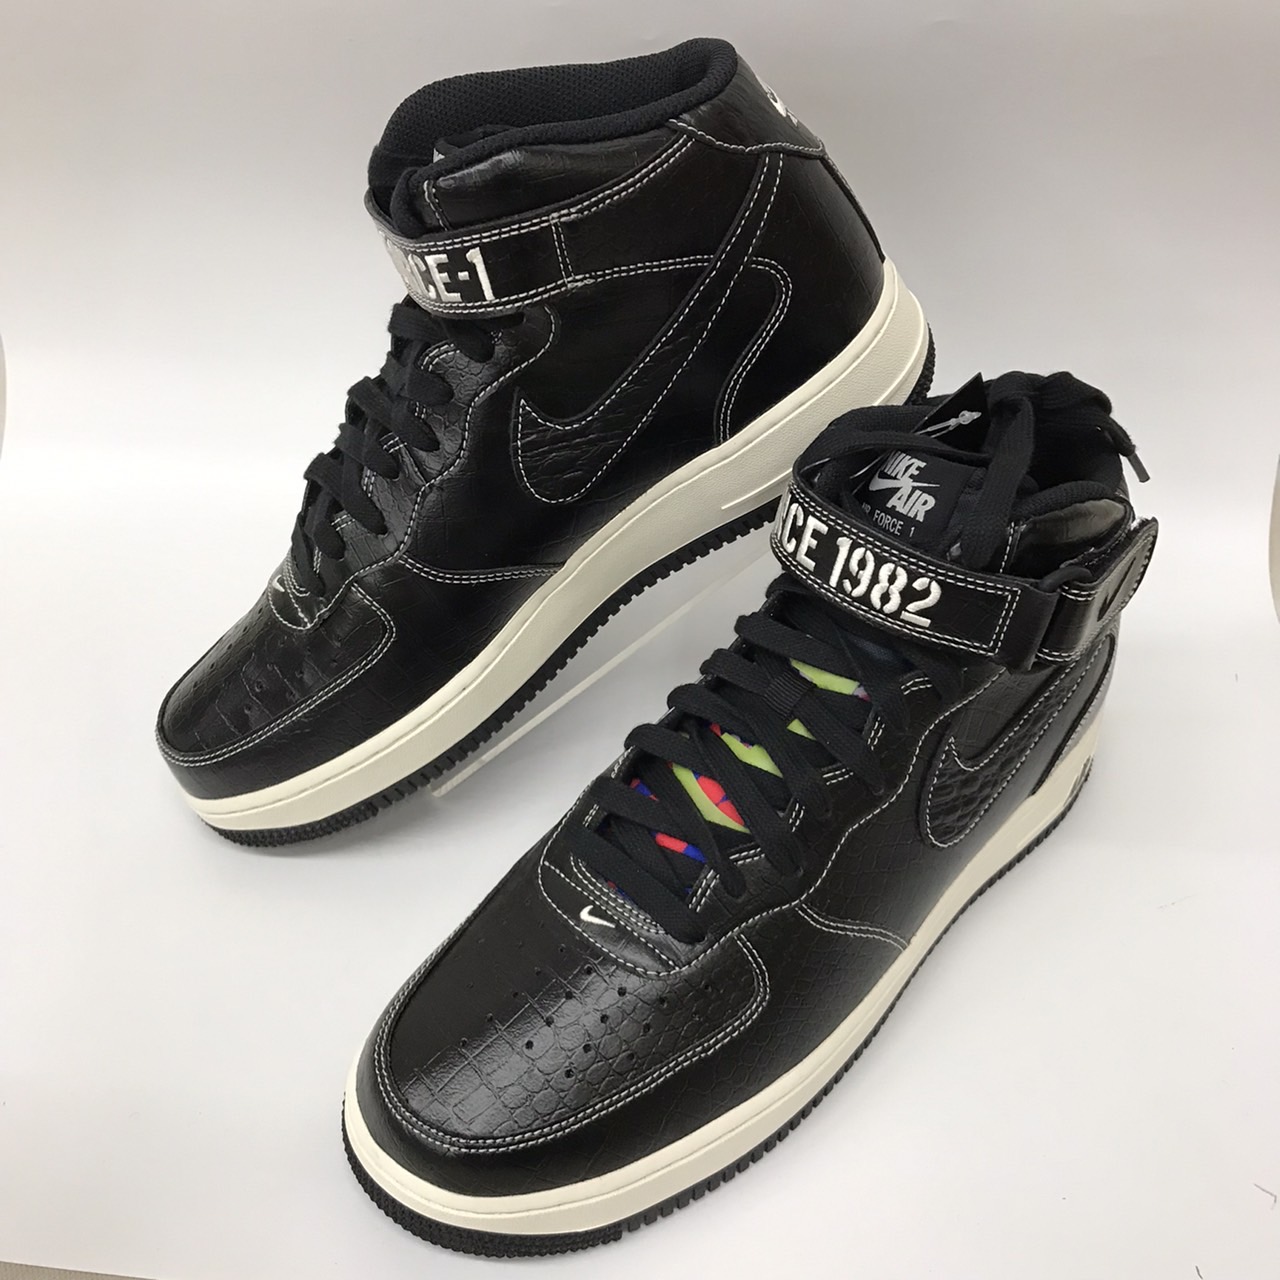 Nike ナイキ Air Force エアフォース 1 Mid LX “Our Force 1